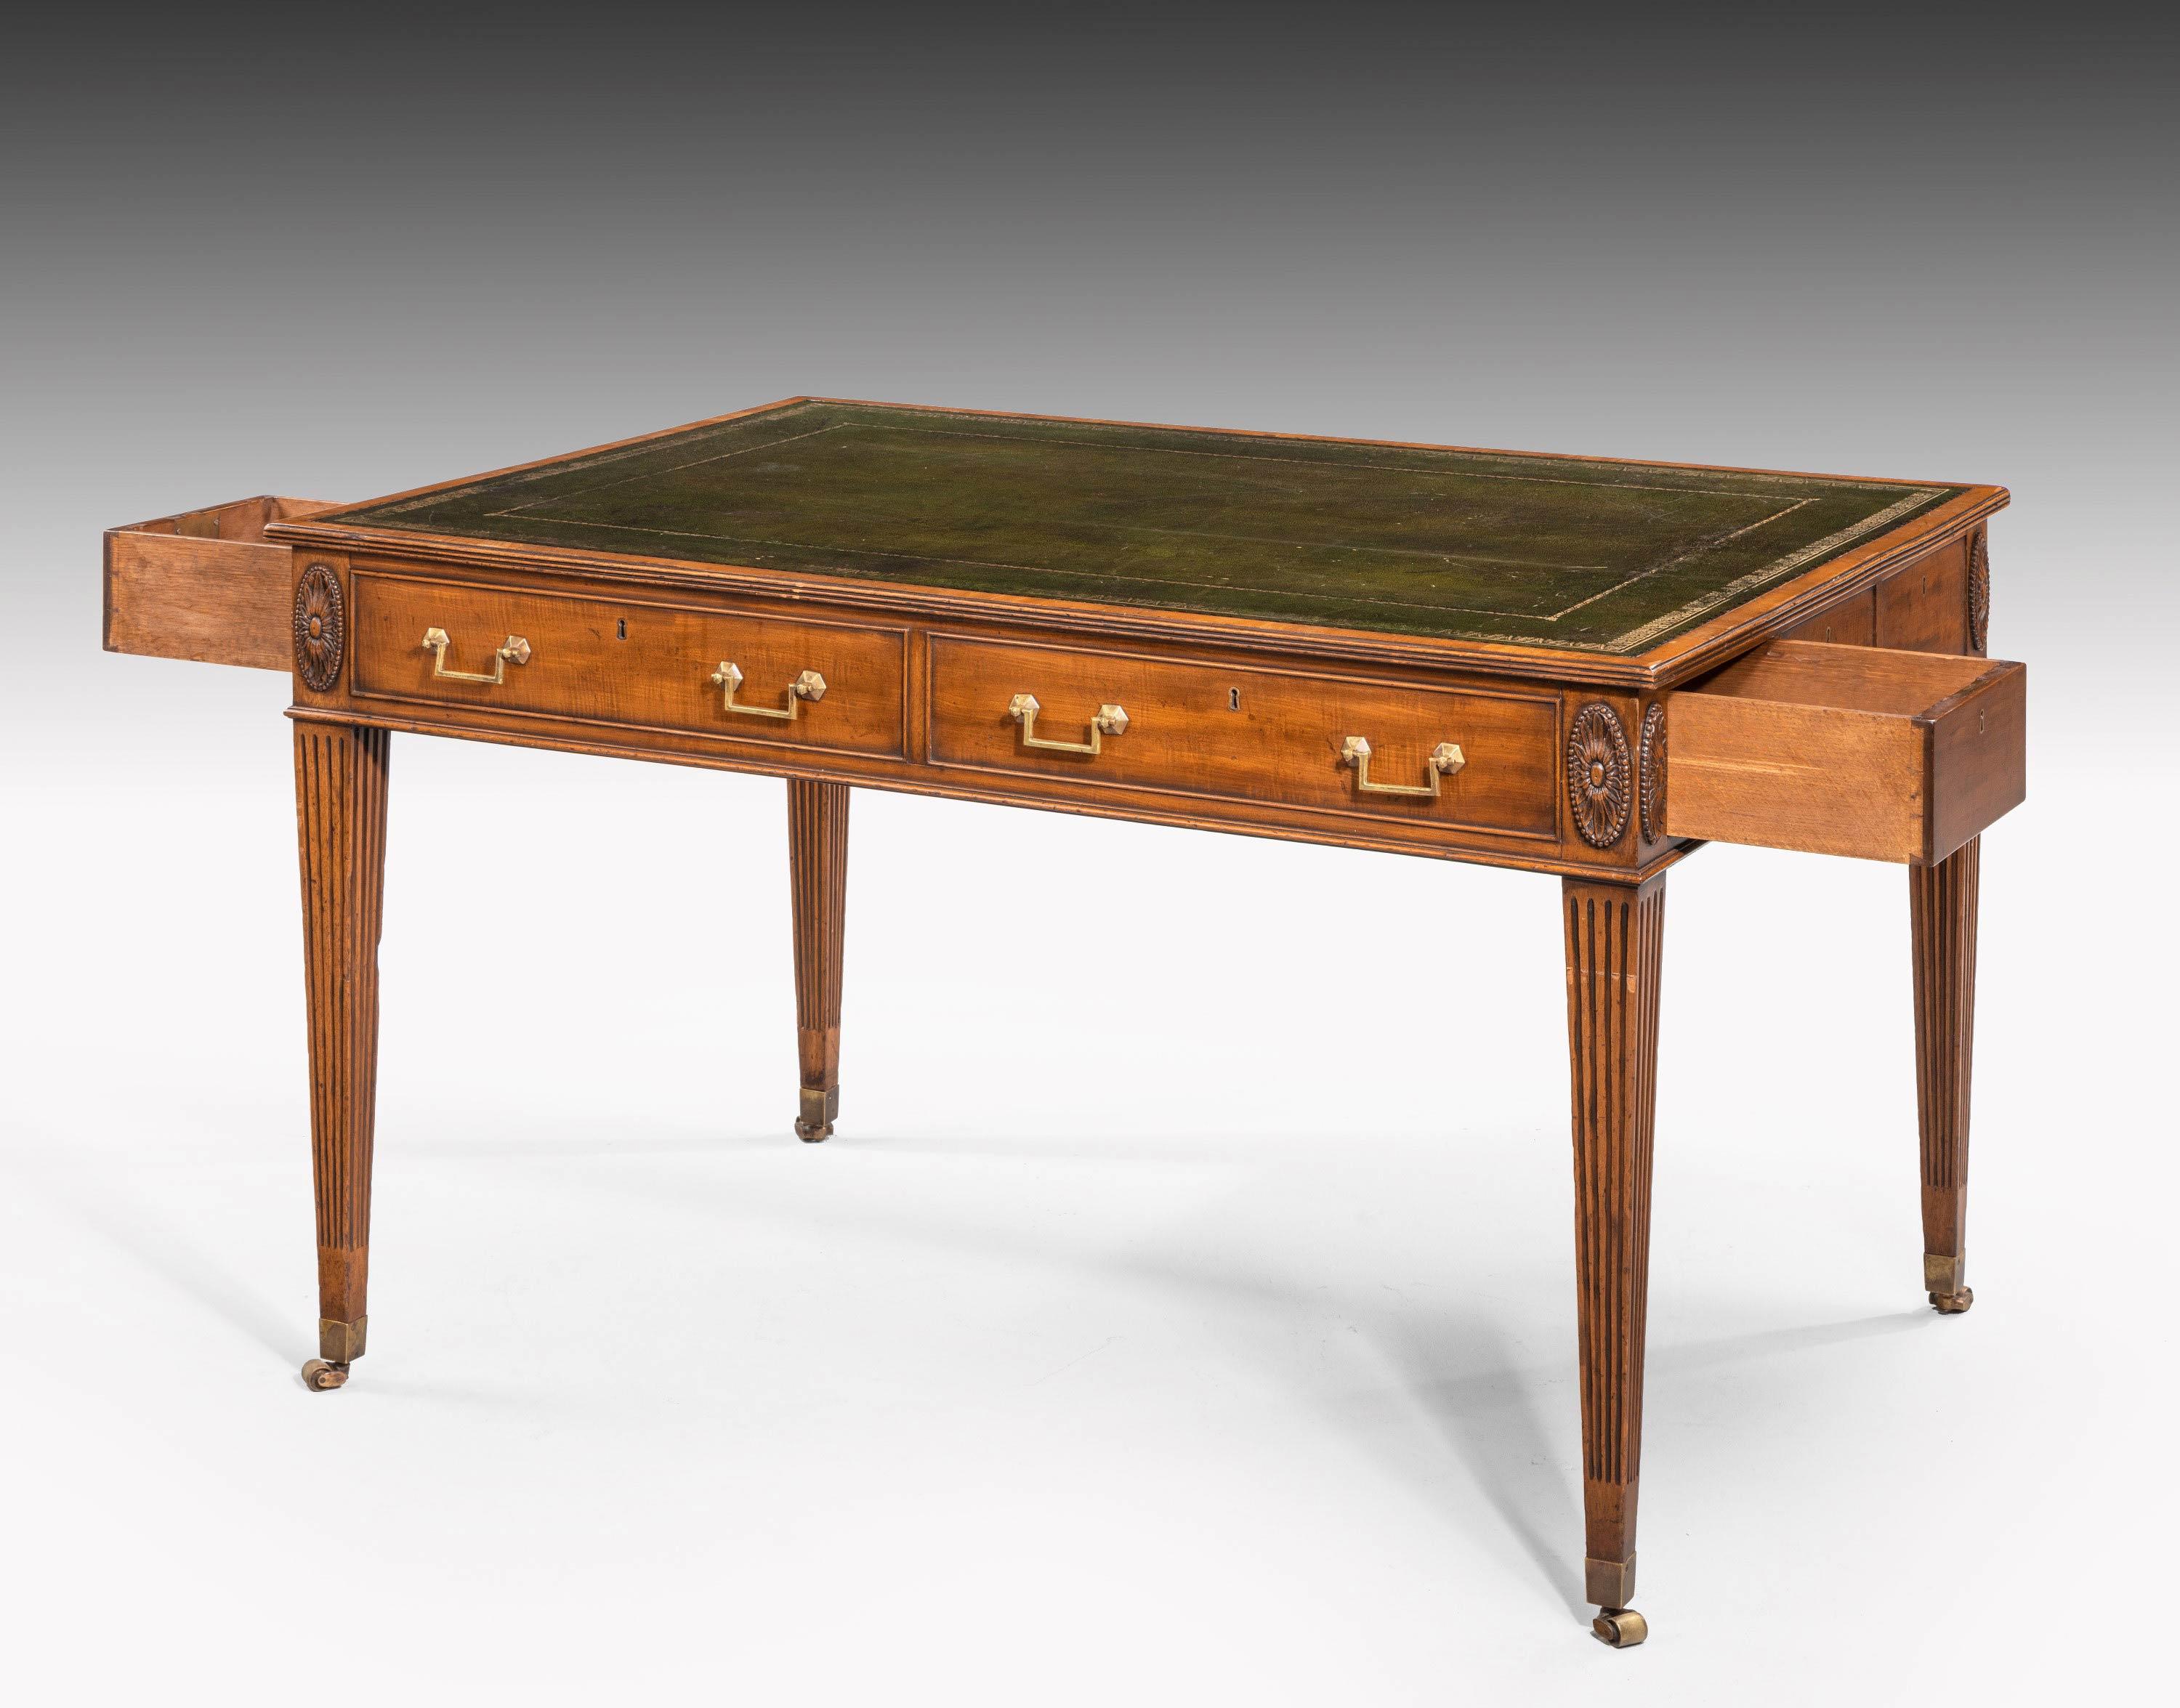 A very fine quality George III period mahogany library table on beautifully carved, beaded, supports terminating in the original shoes and castors. The drawers retaining their original finely cast brass handles. The top of the supports with very